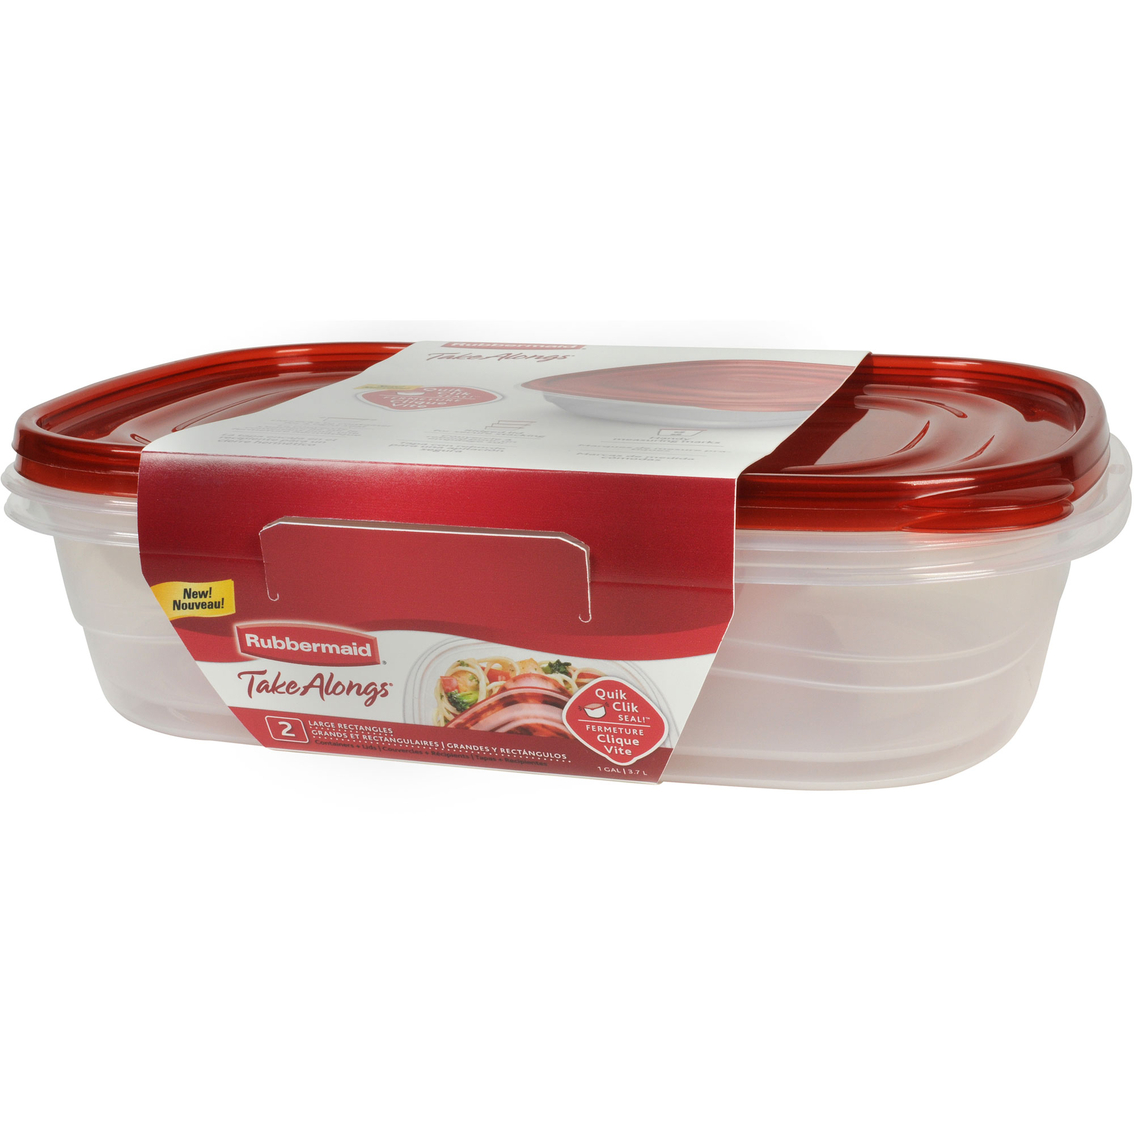 Rubbermaid TakeAlongs Large Rectangular Container, 2 ct - Pay Less